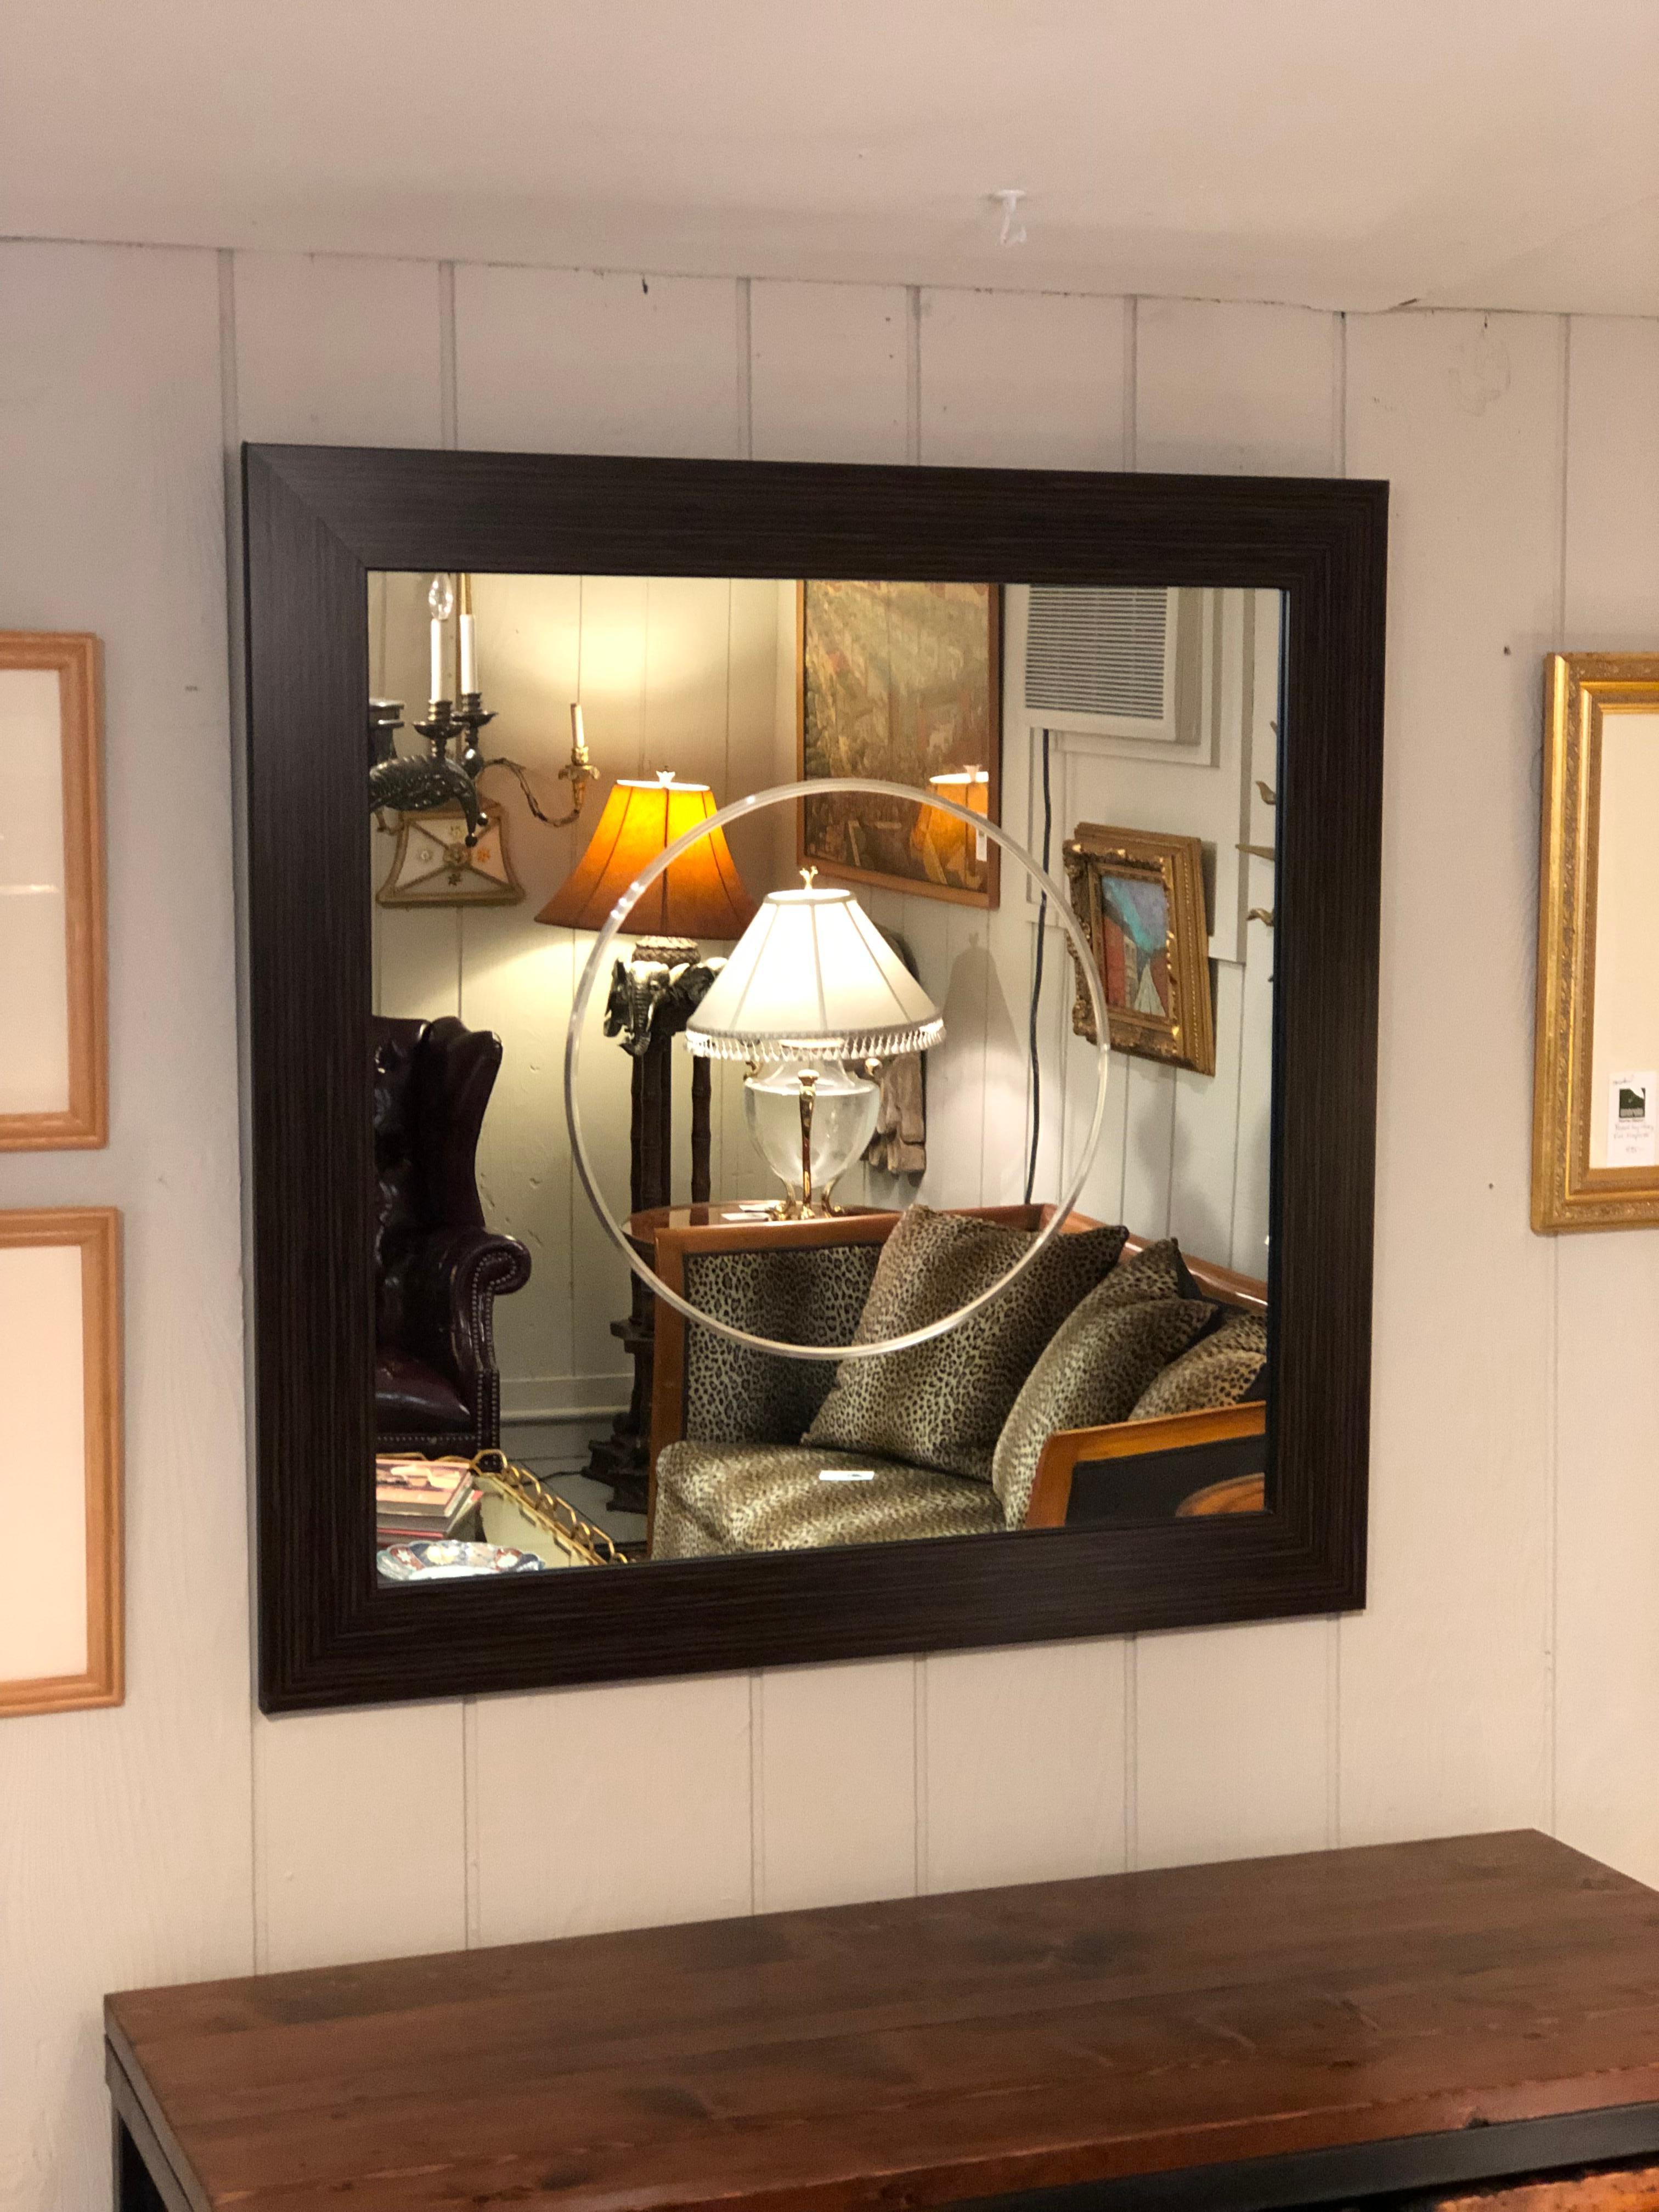 A stunning contemporary wall mirror having simplicity and clean lines with the center of the mirror decorated with a large etched circle. The frame of the mirror is a striated wood faux leather.